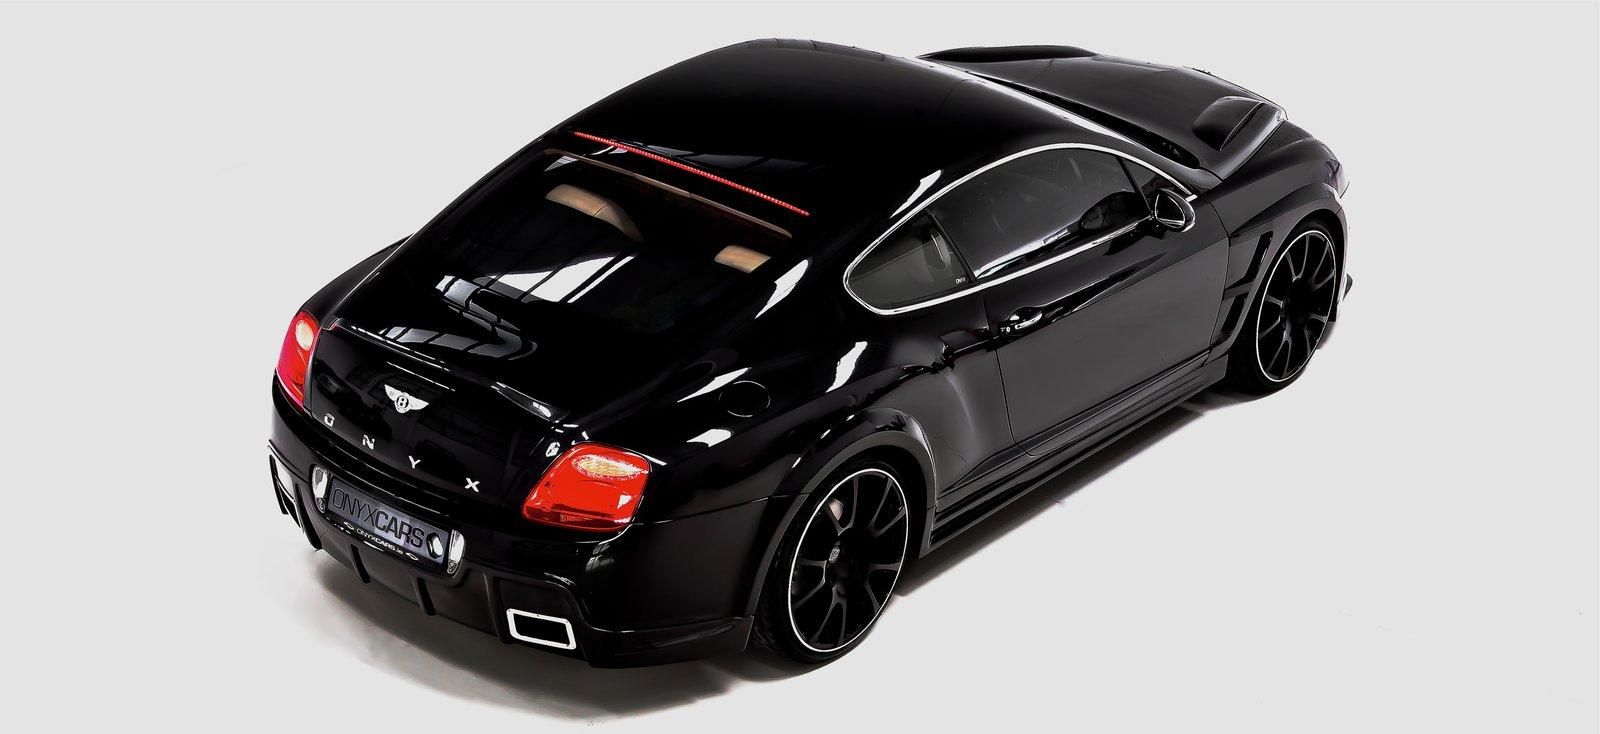 2011 Bentley Continental GTO by Onyx